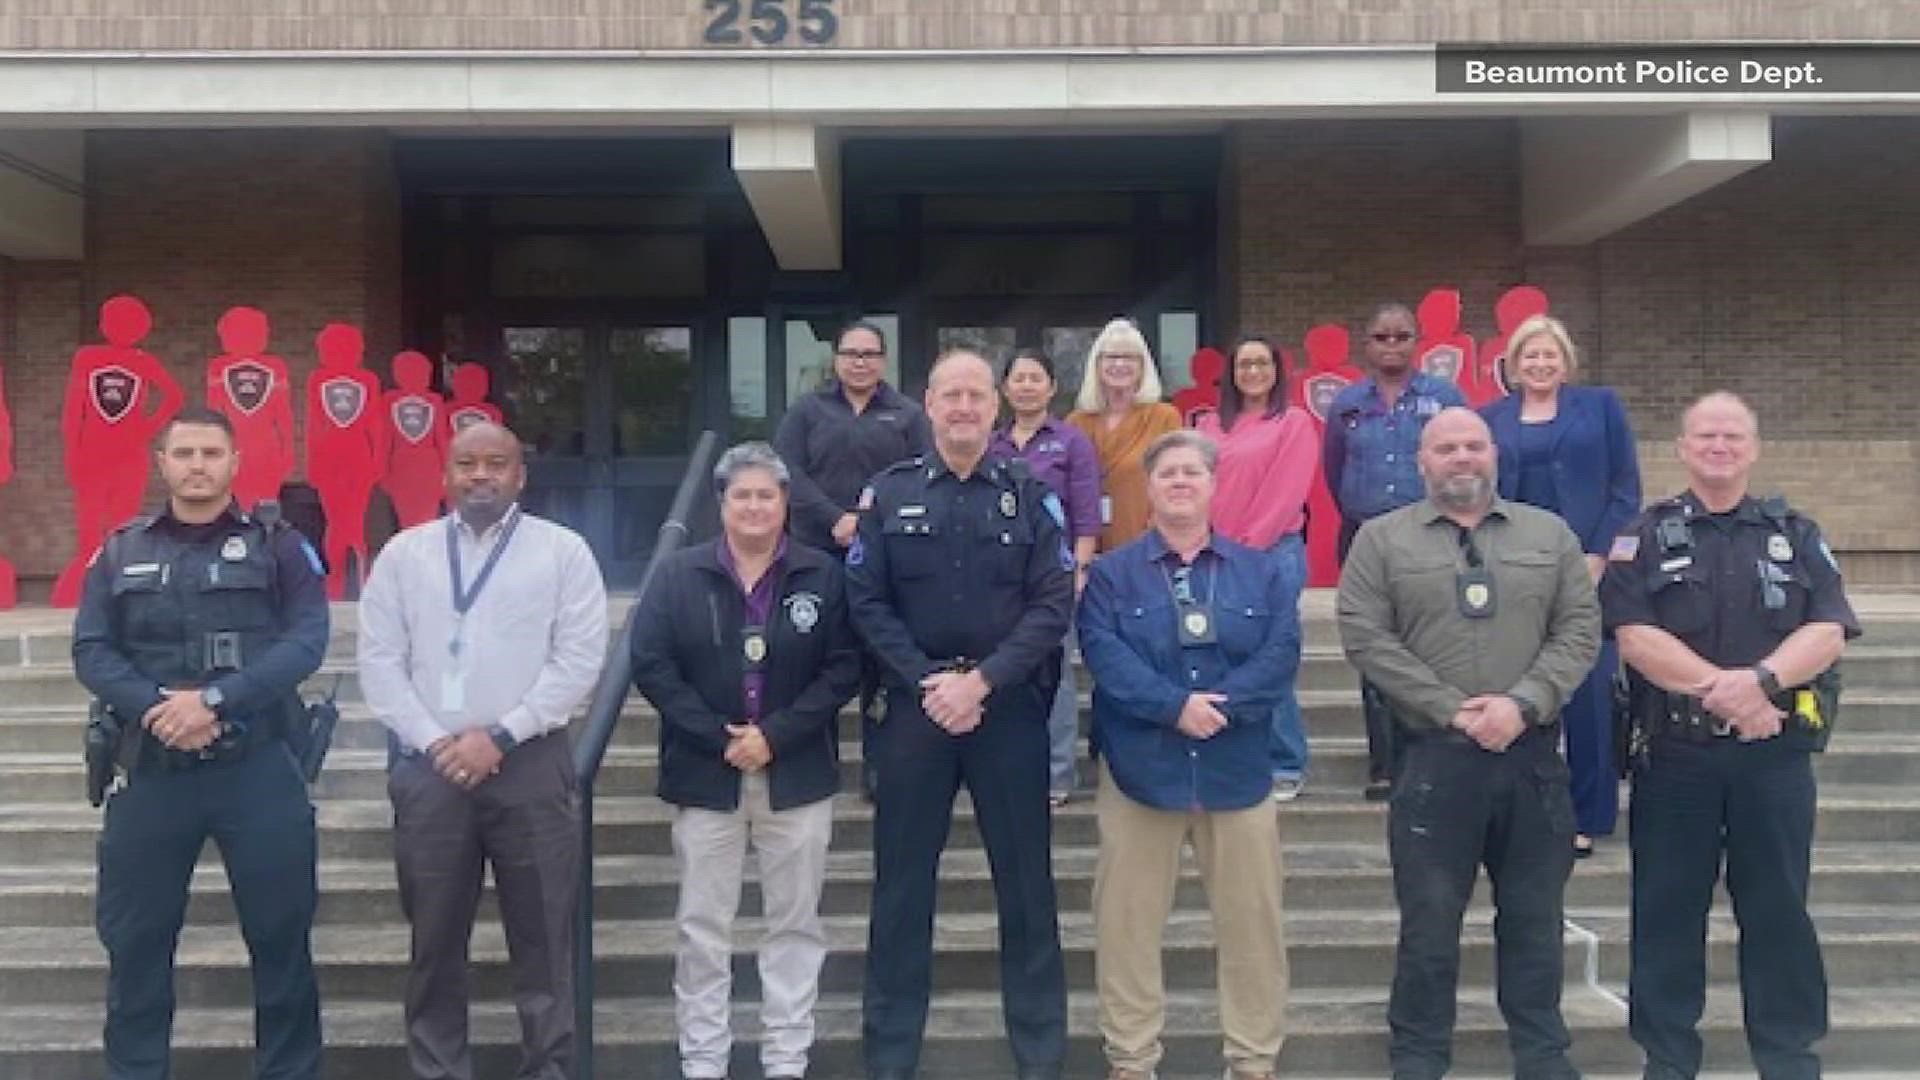 The entrance of the Beaumont Police Department is lined with life-sized figures as Southeast Texans honor those who lost their lives to domestic violence.